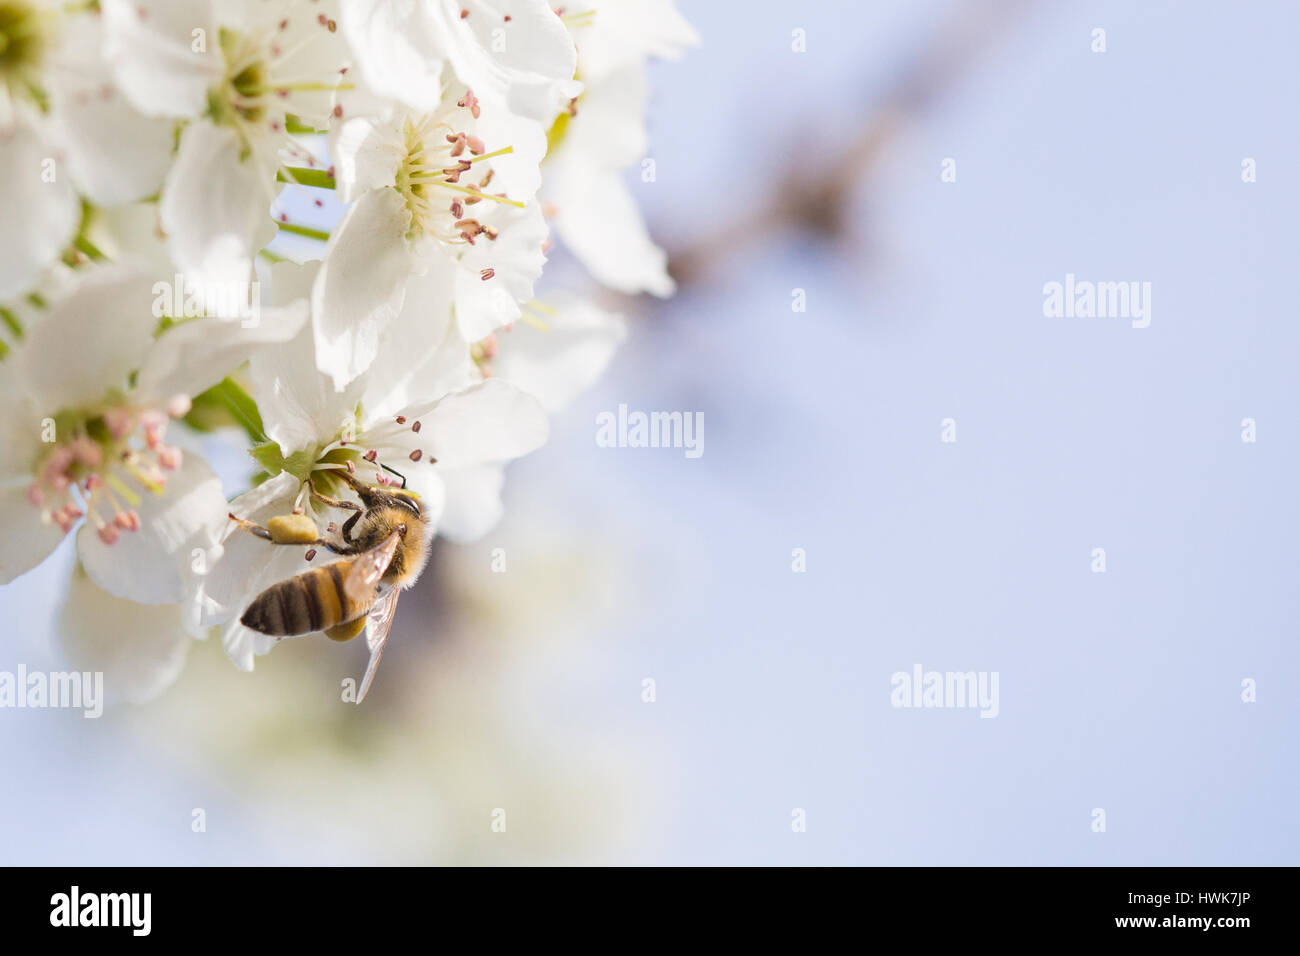 Honeybee Harvesting Pollen From Blossoming Tree Buds. Stock Photo